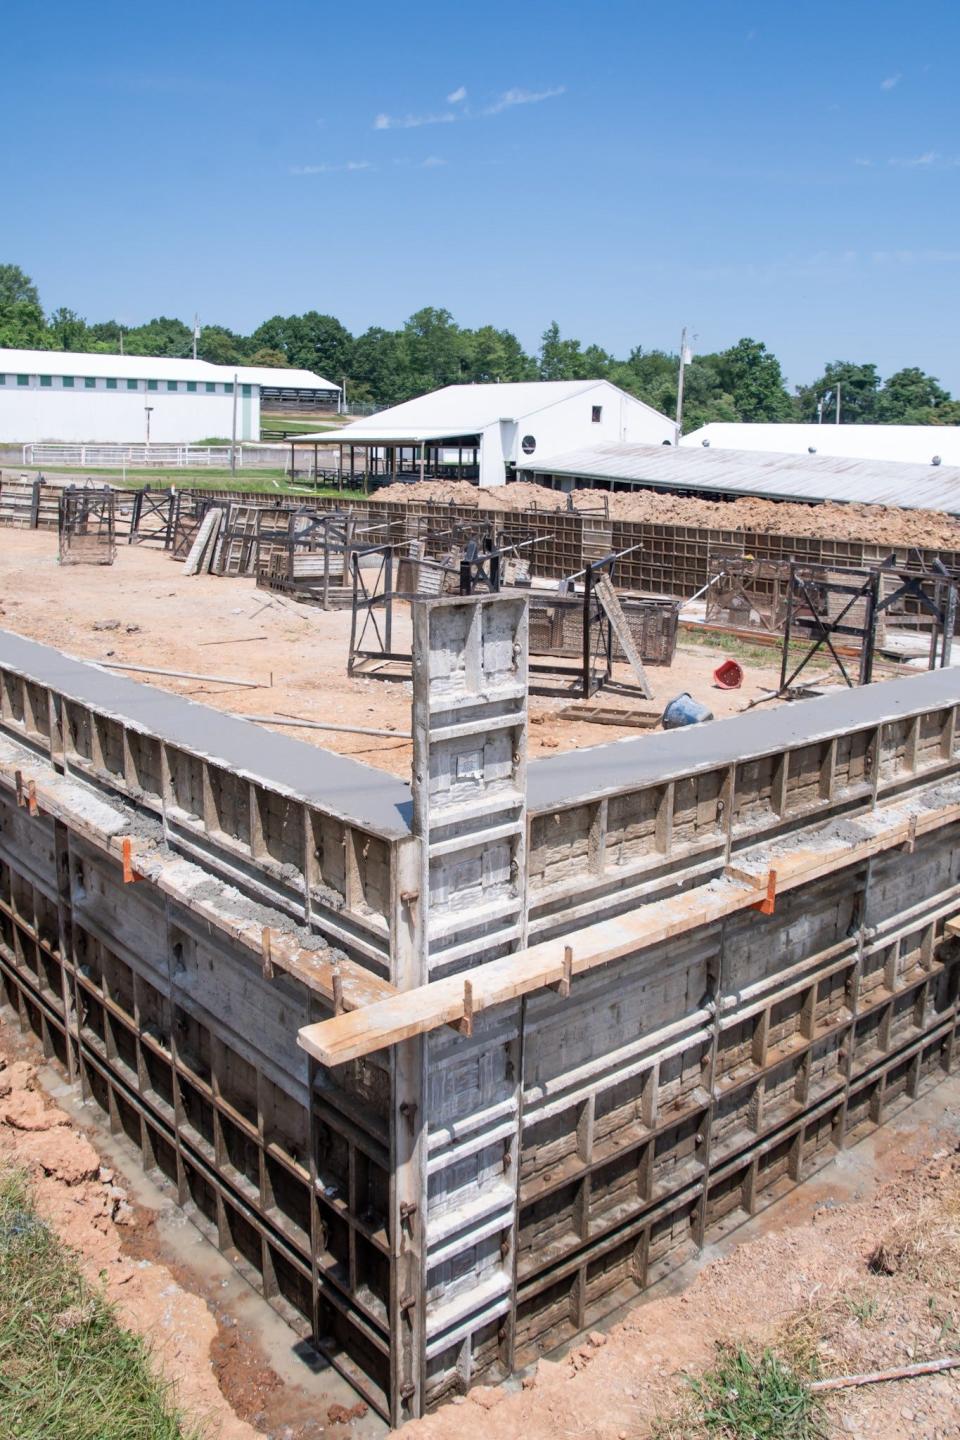 Freshly poured concrete begins to set at the new multi-purpose building at the Guernsey County Fairgrounds.